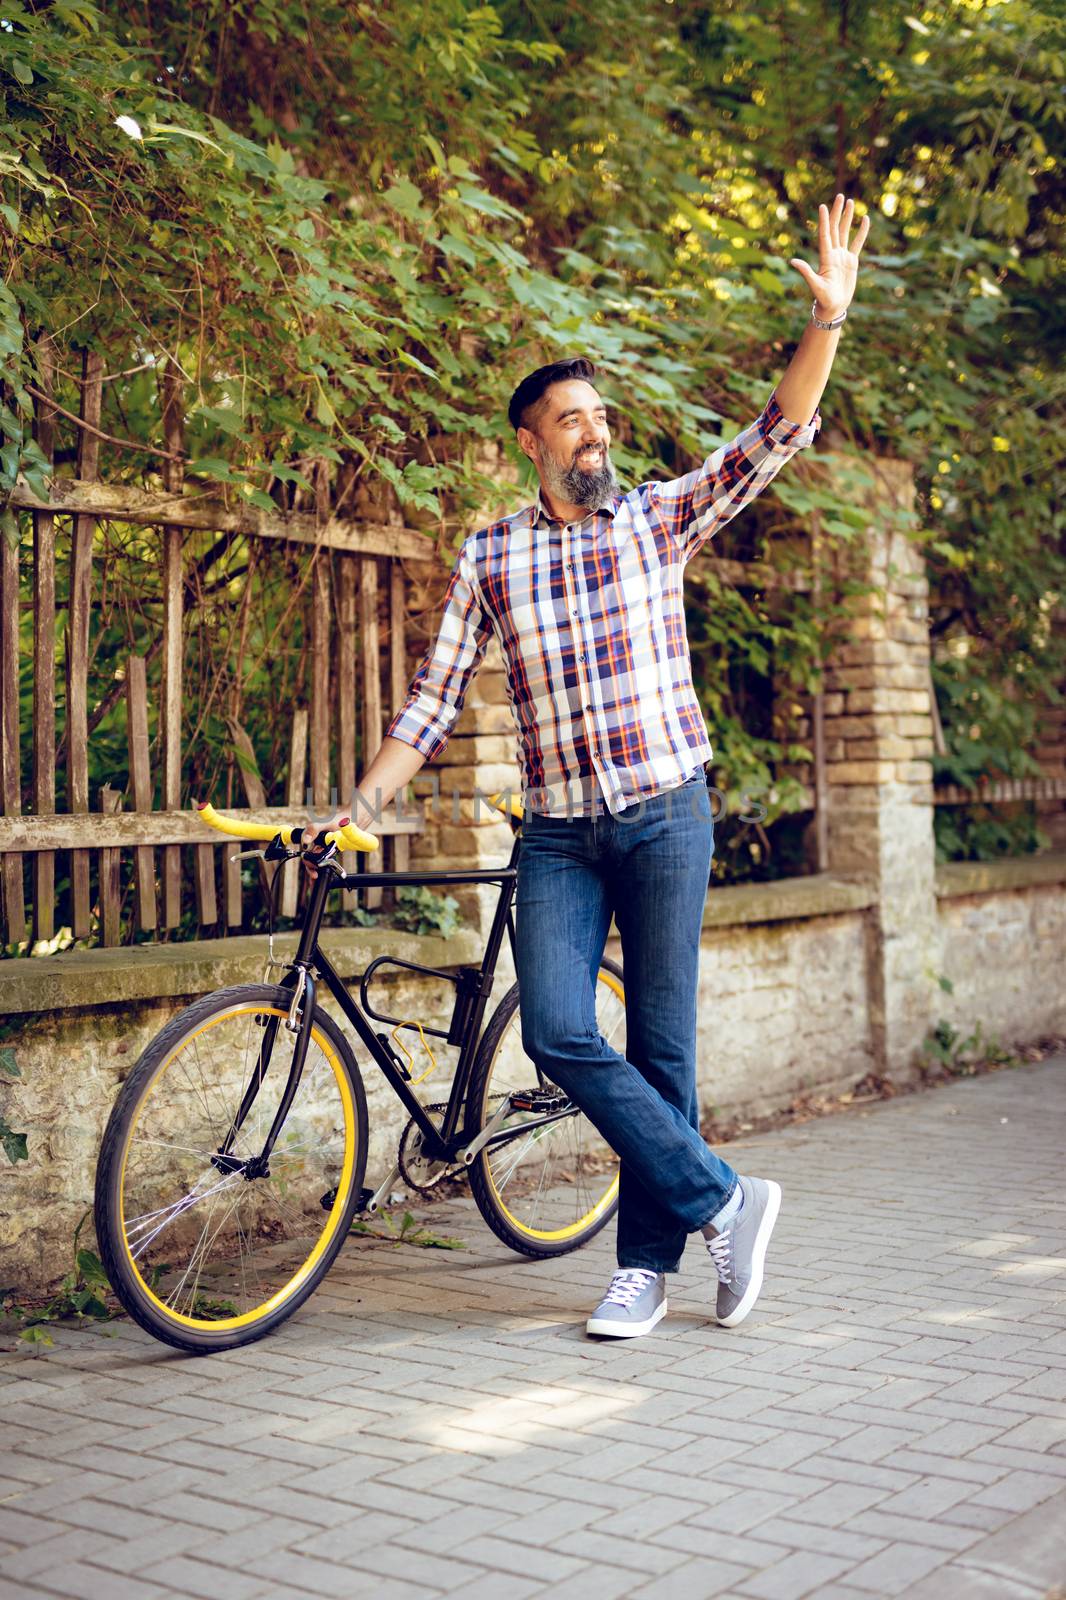 Casual businessman going to work by bicycle. He is walking next to bike and waving away.